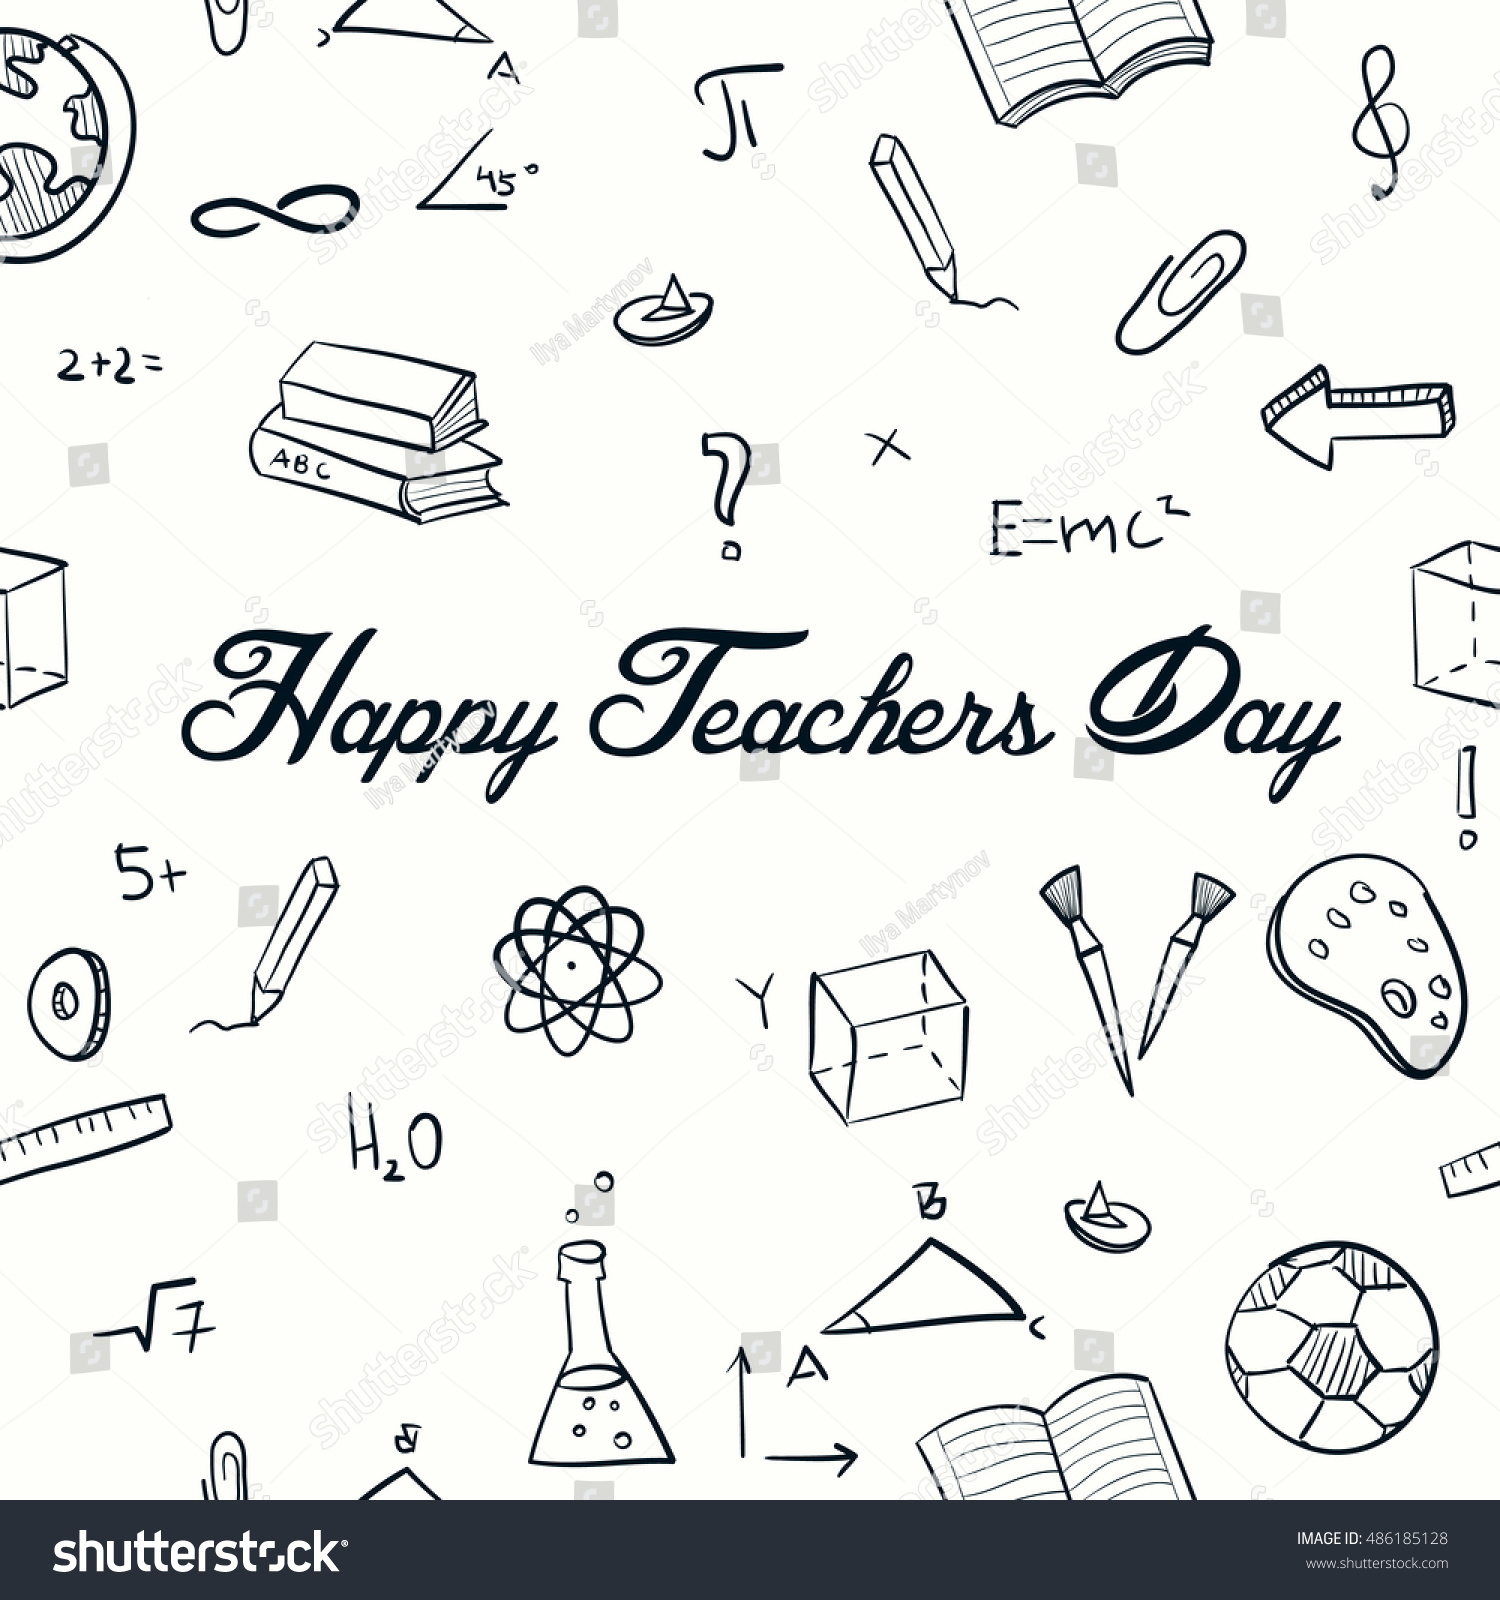 Happy Teachers Day Concept Icon On Stock Vector Royalty Free